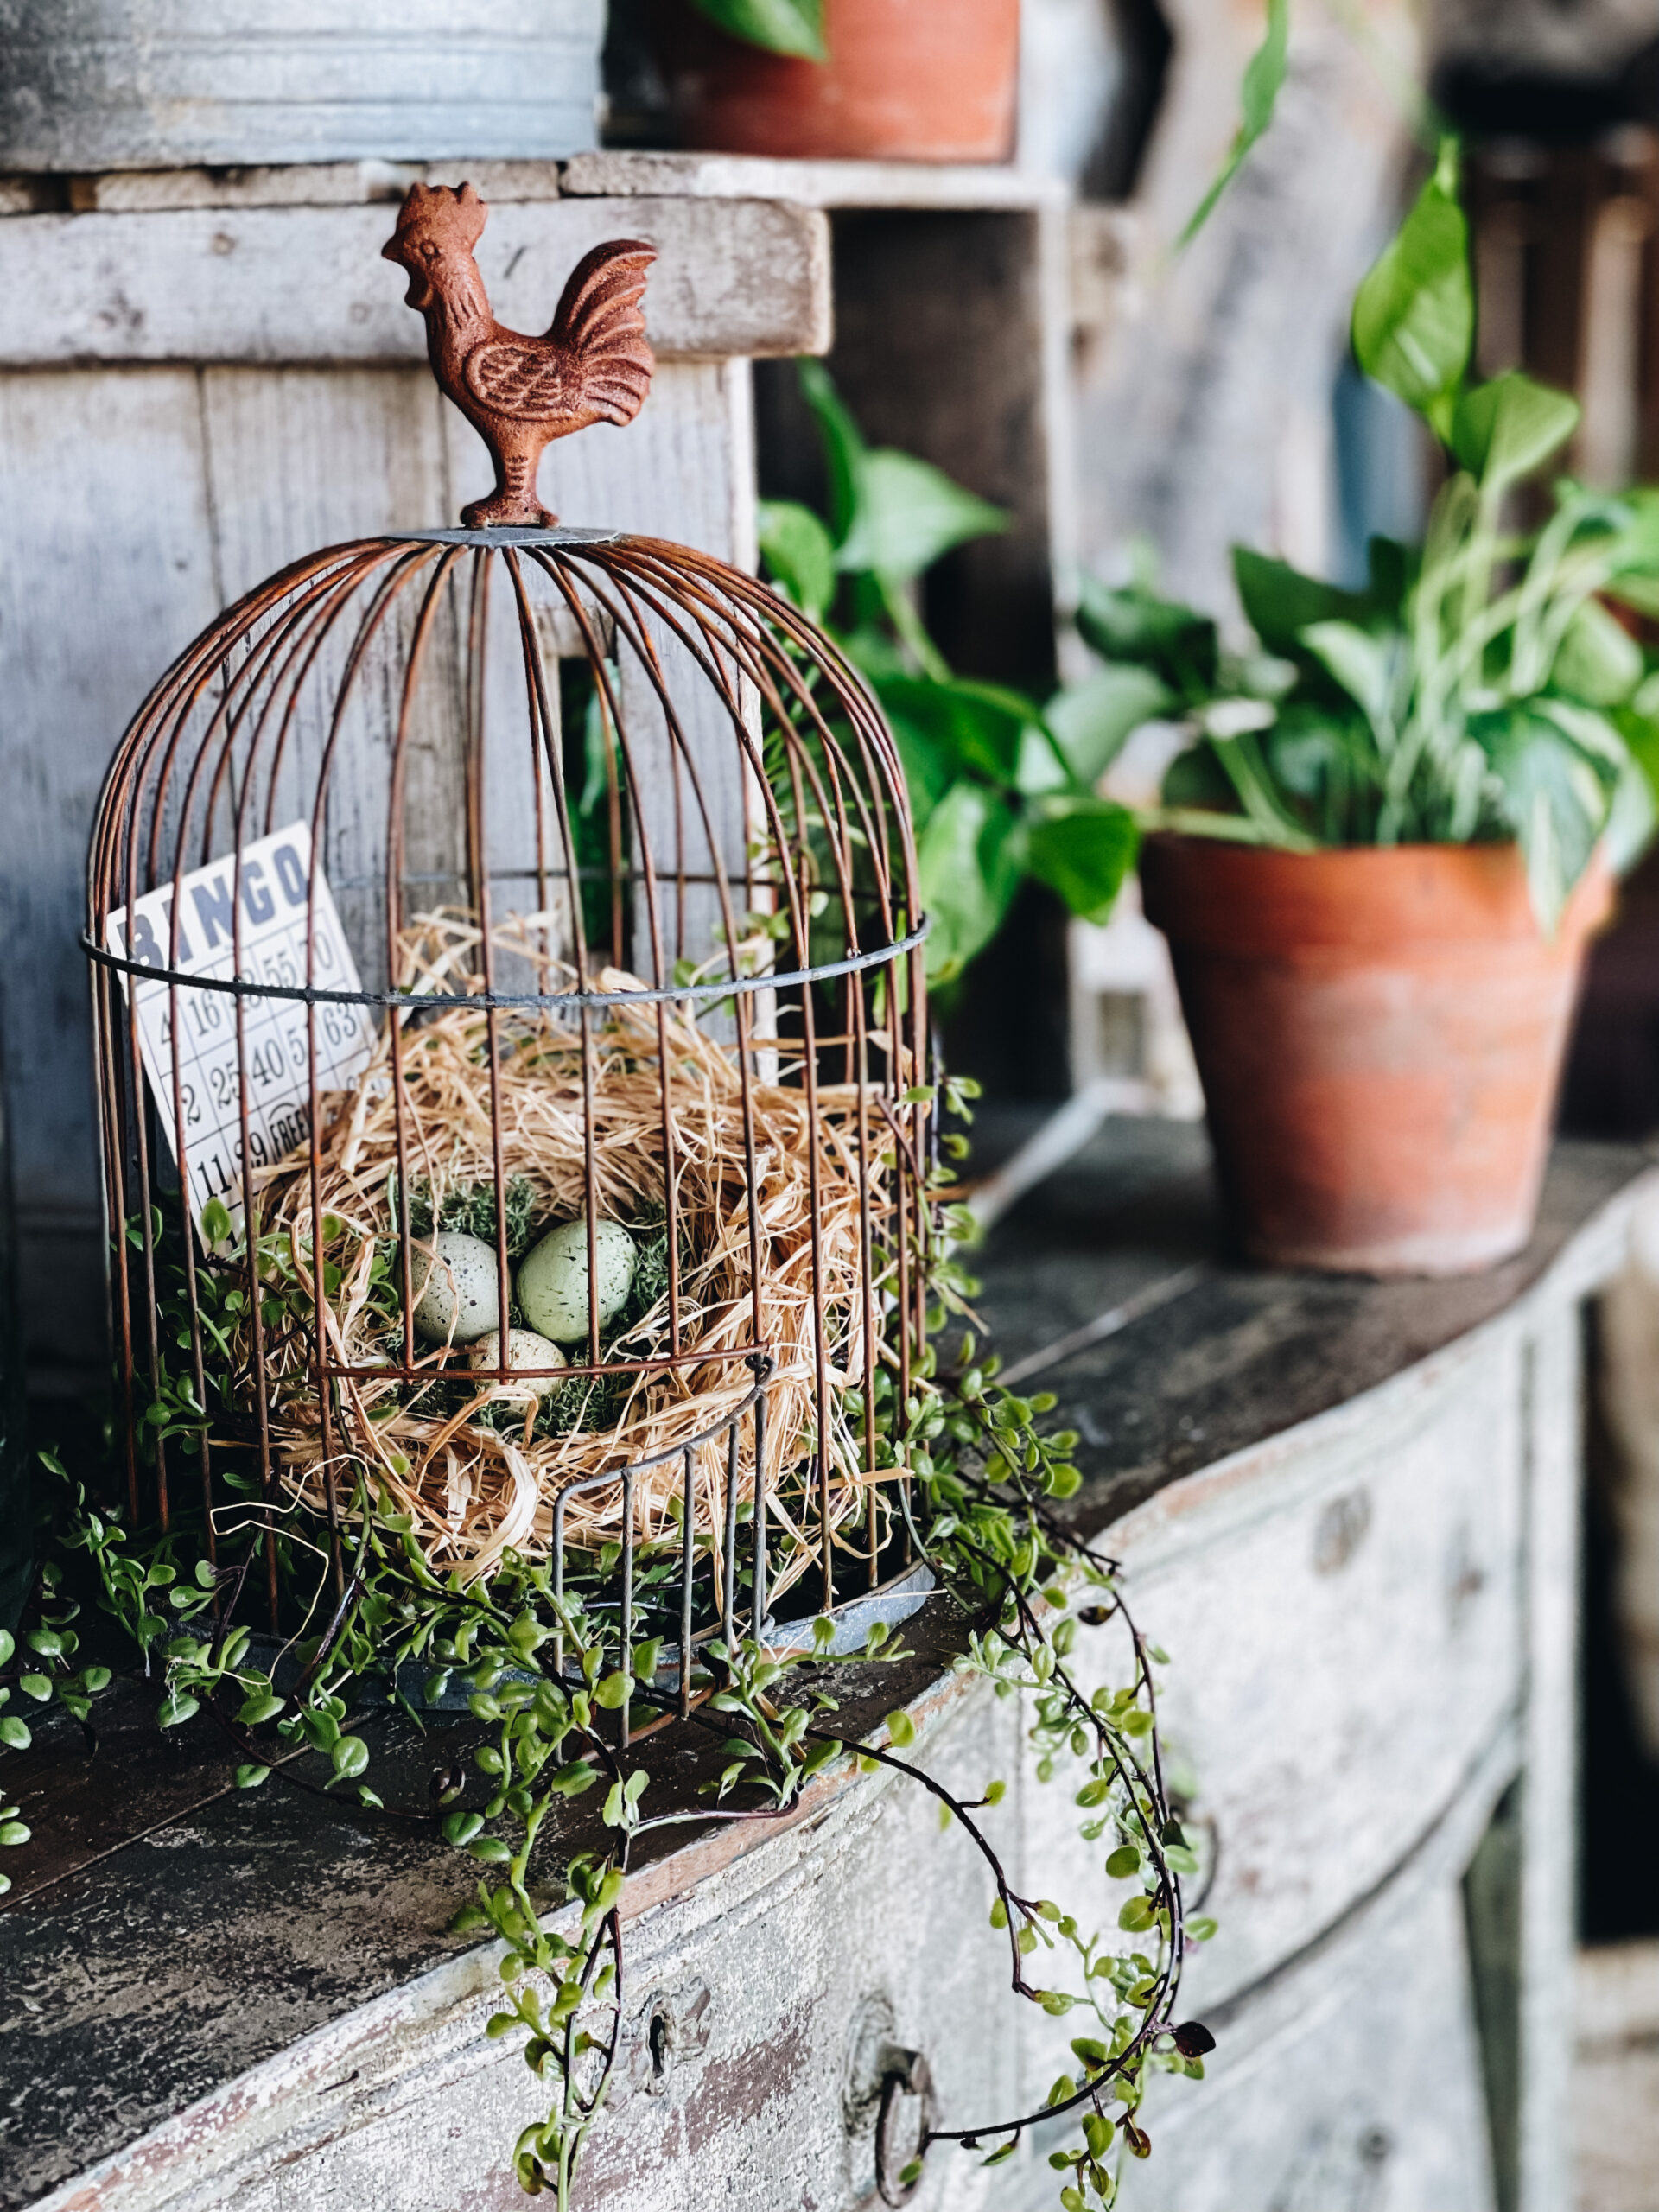 https://roostandrestore.com/wp-content/uploads/2022/03/Rustic-bird-cage-styling-ideas-6-scaled.jpg